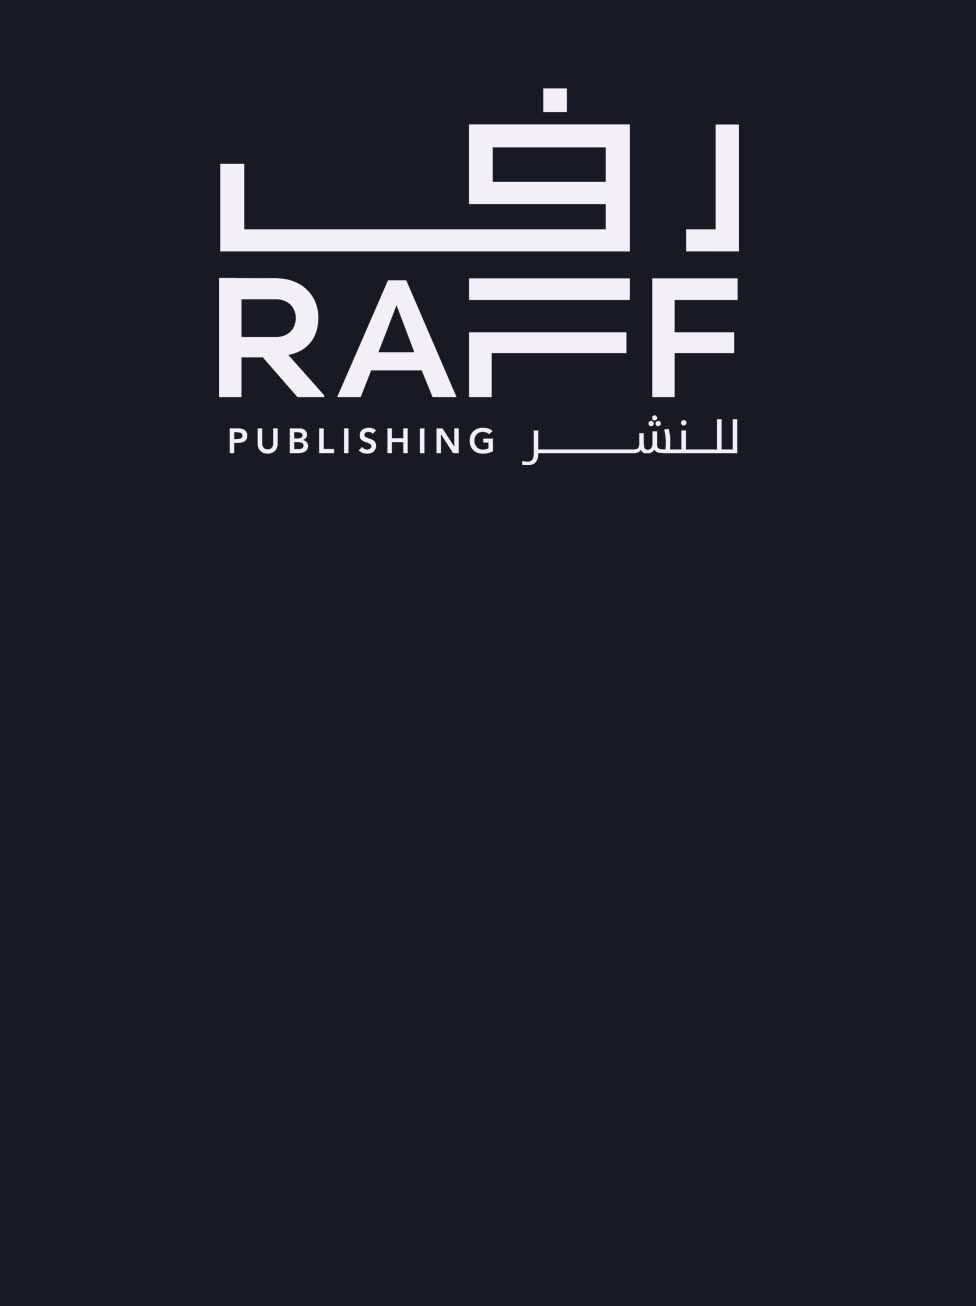 SRMG Expands into Publishing Industry in MENA with the Launch of Raff Publishing